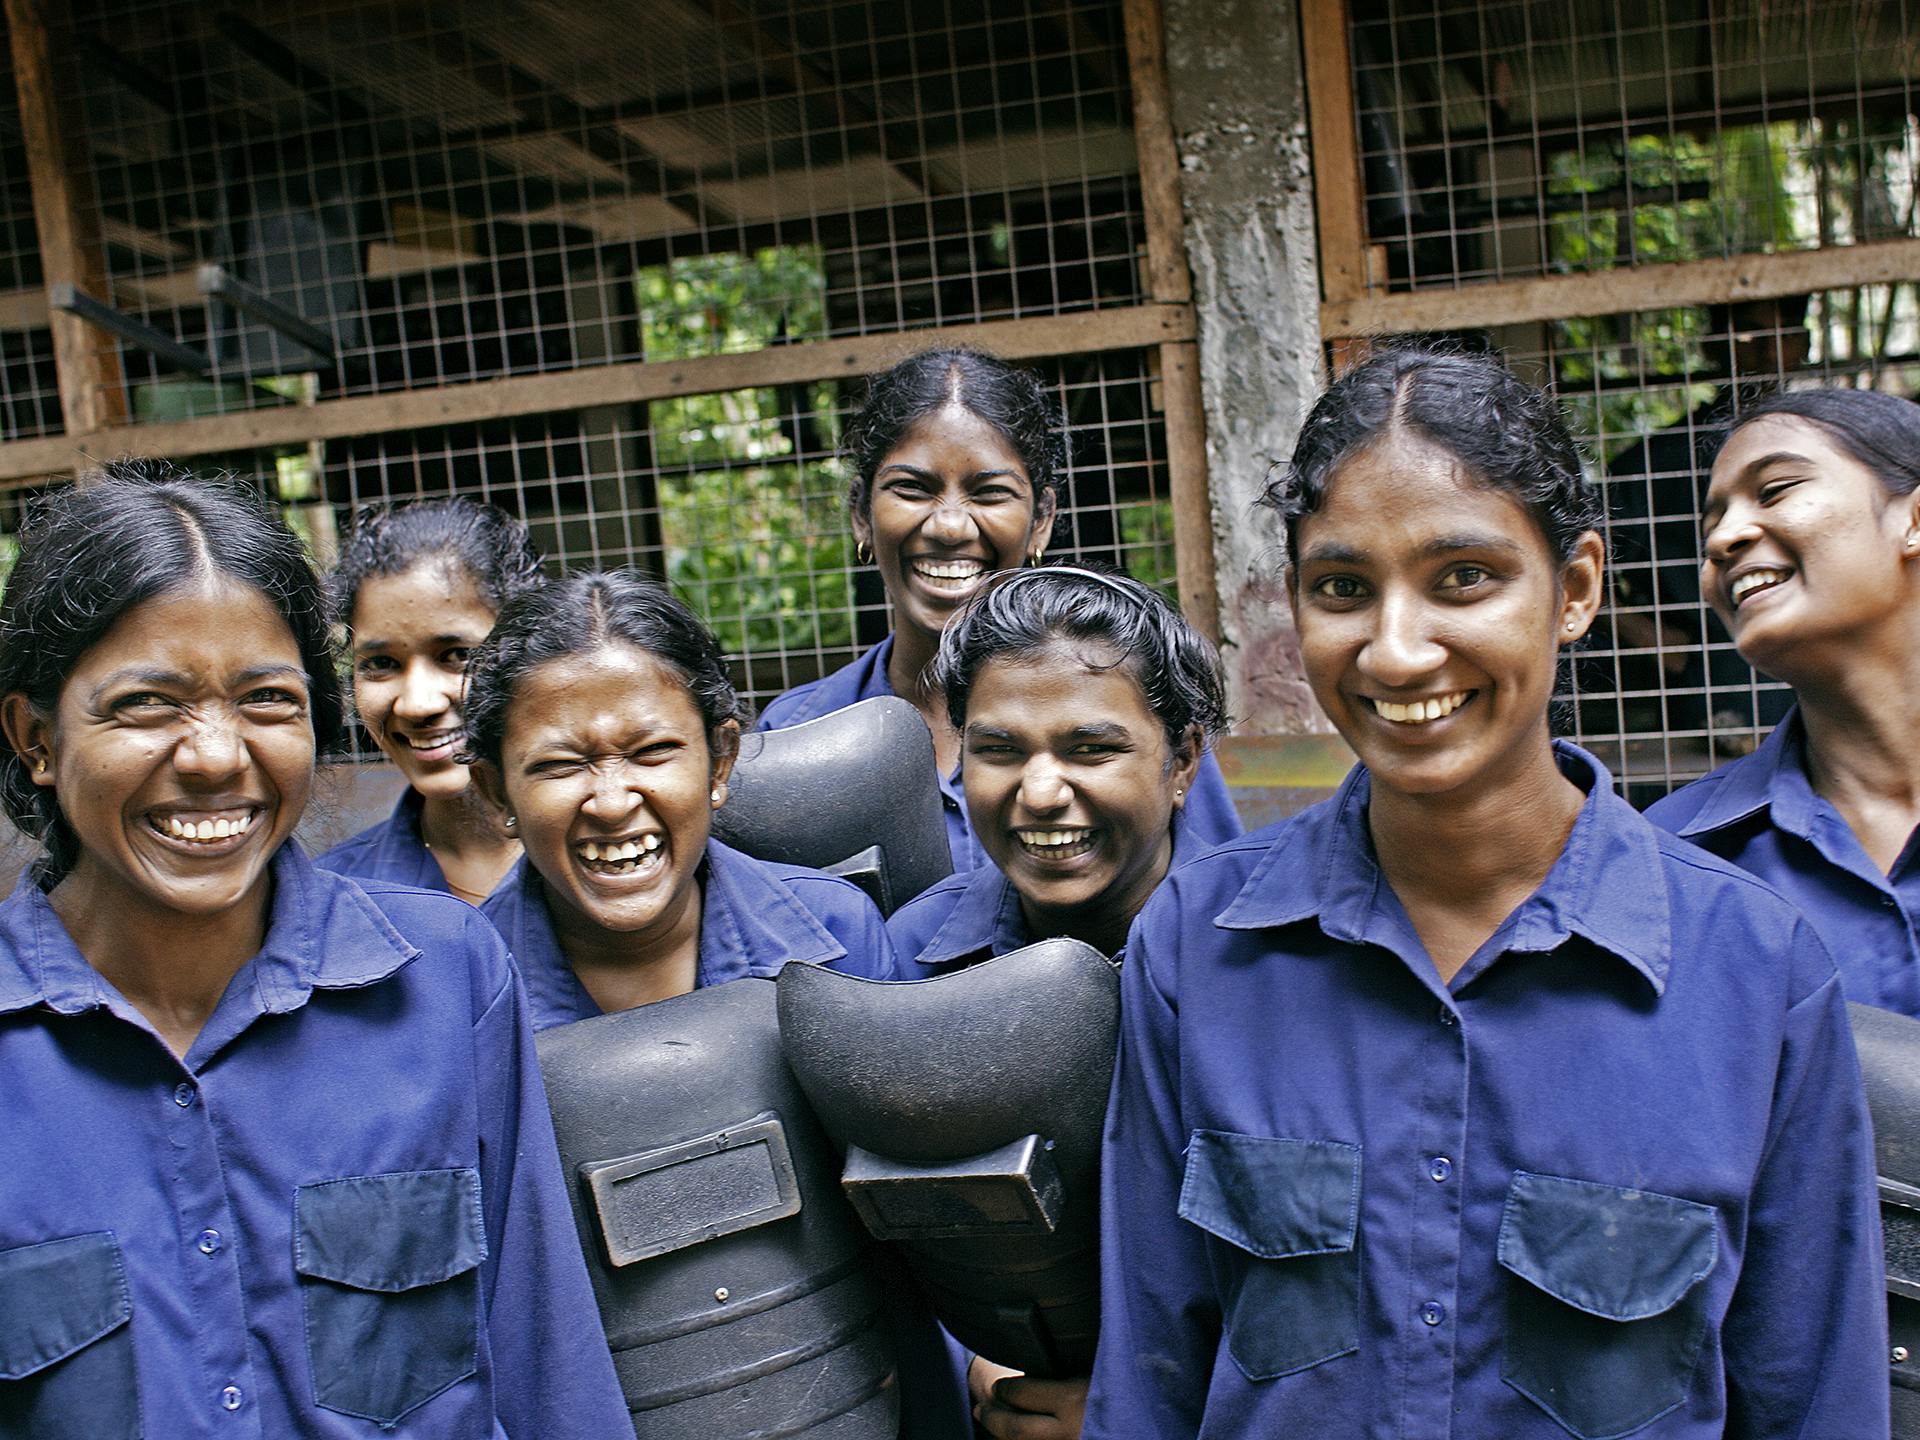 A group of women wearing blue working clothes.